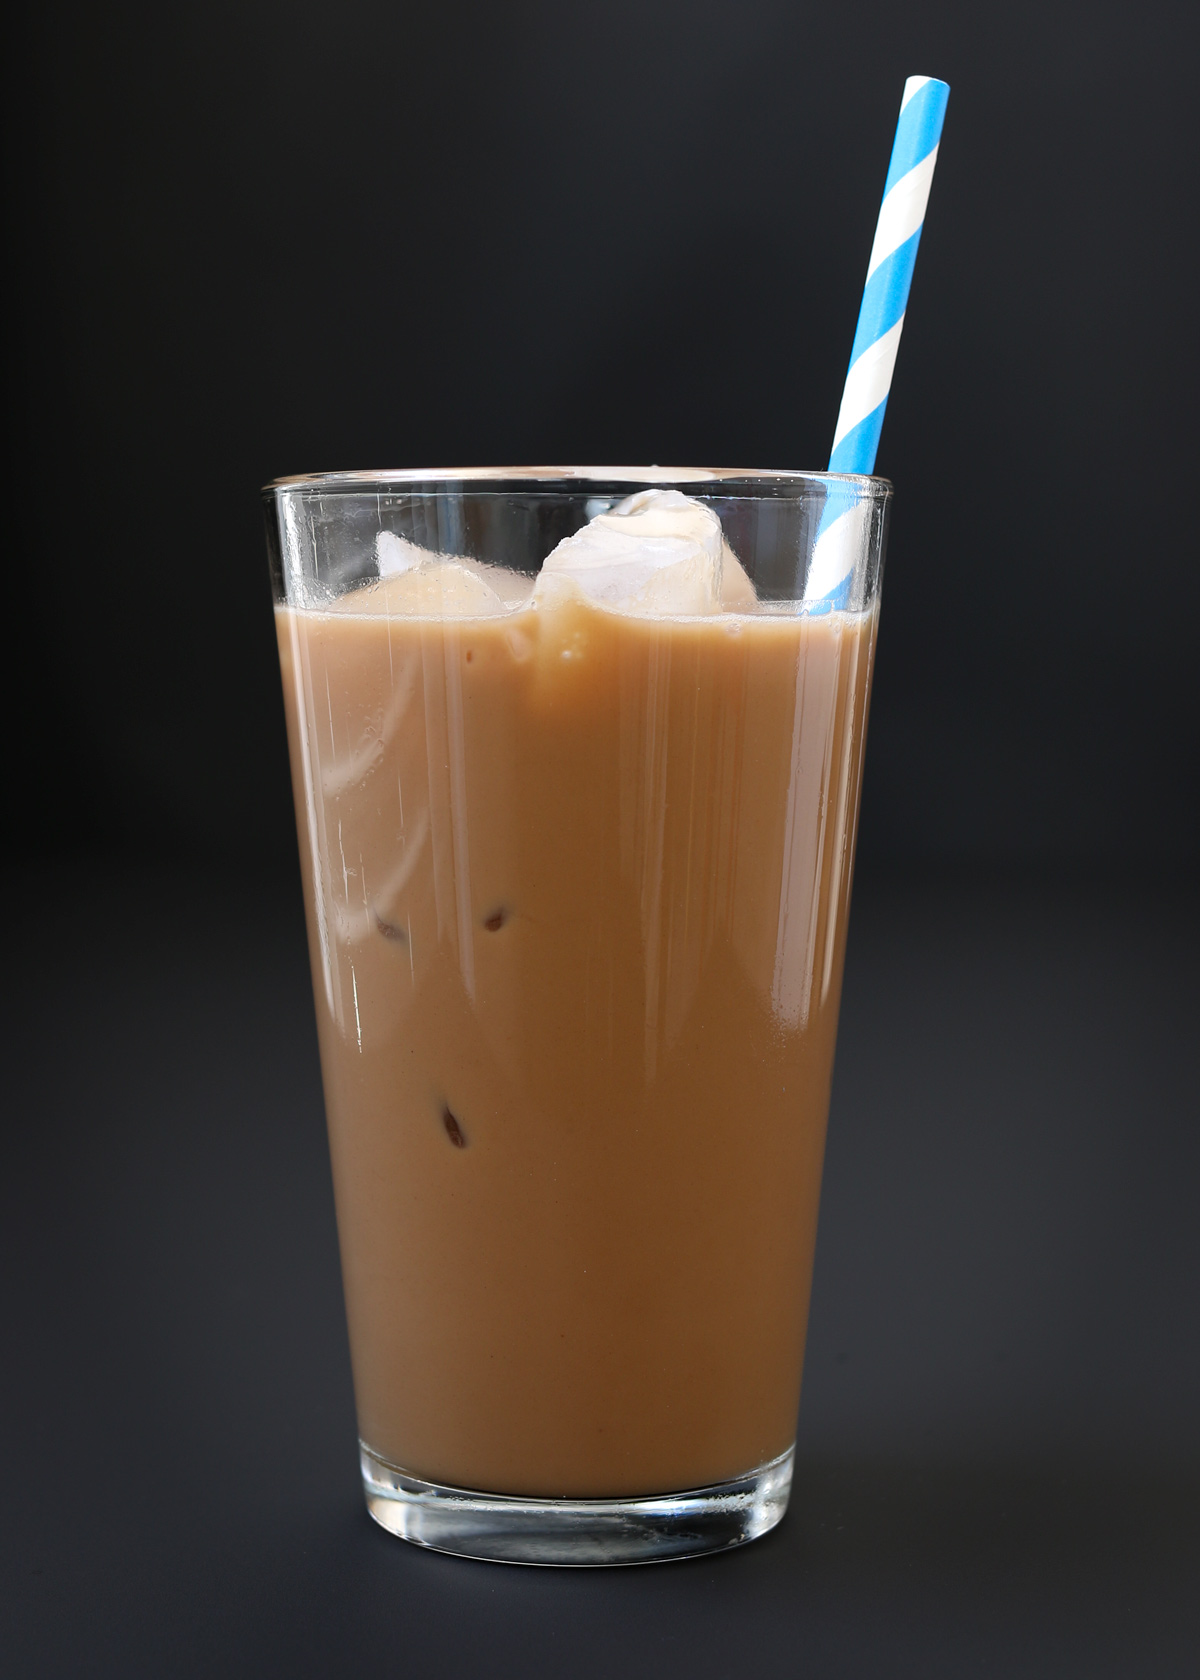 iced mocha in tall glass with blue striped straw.